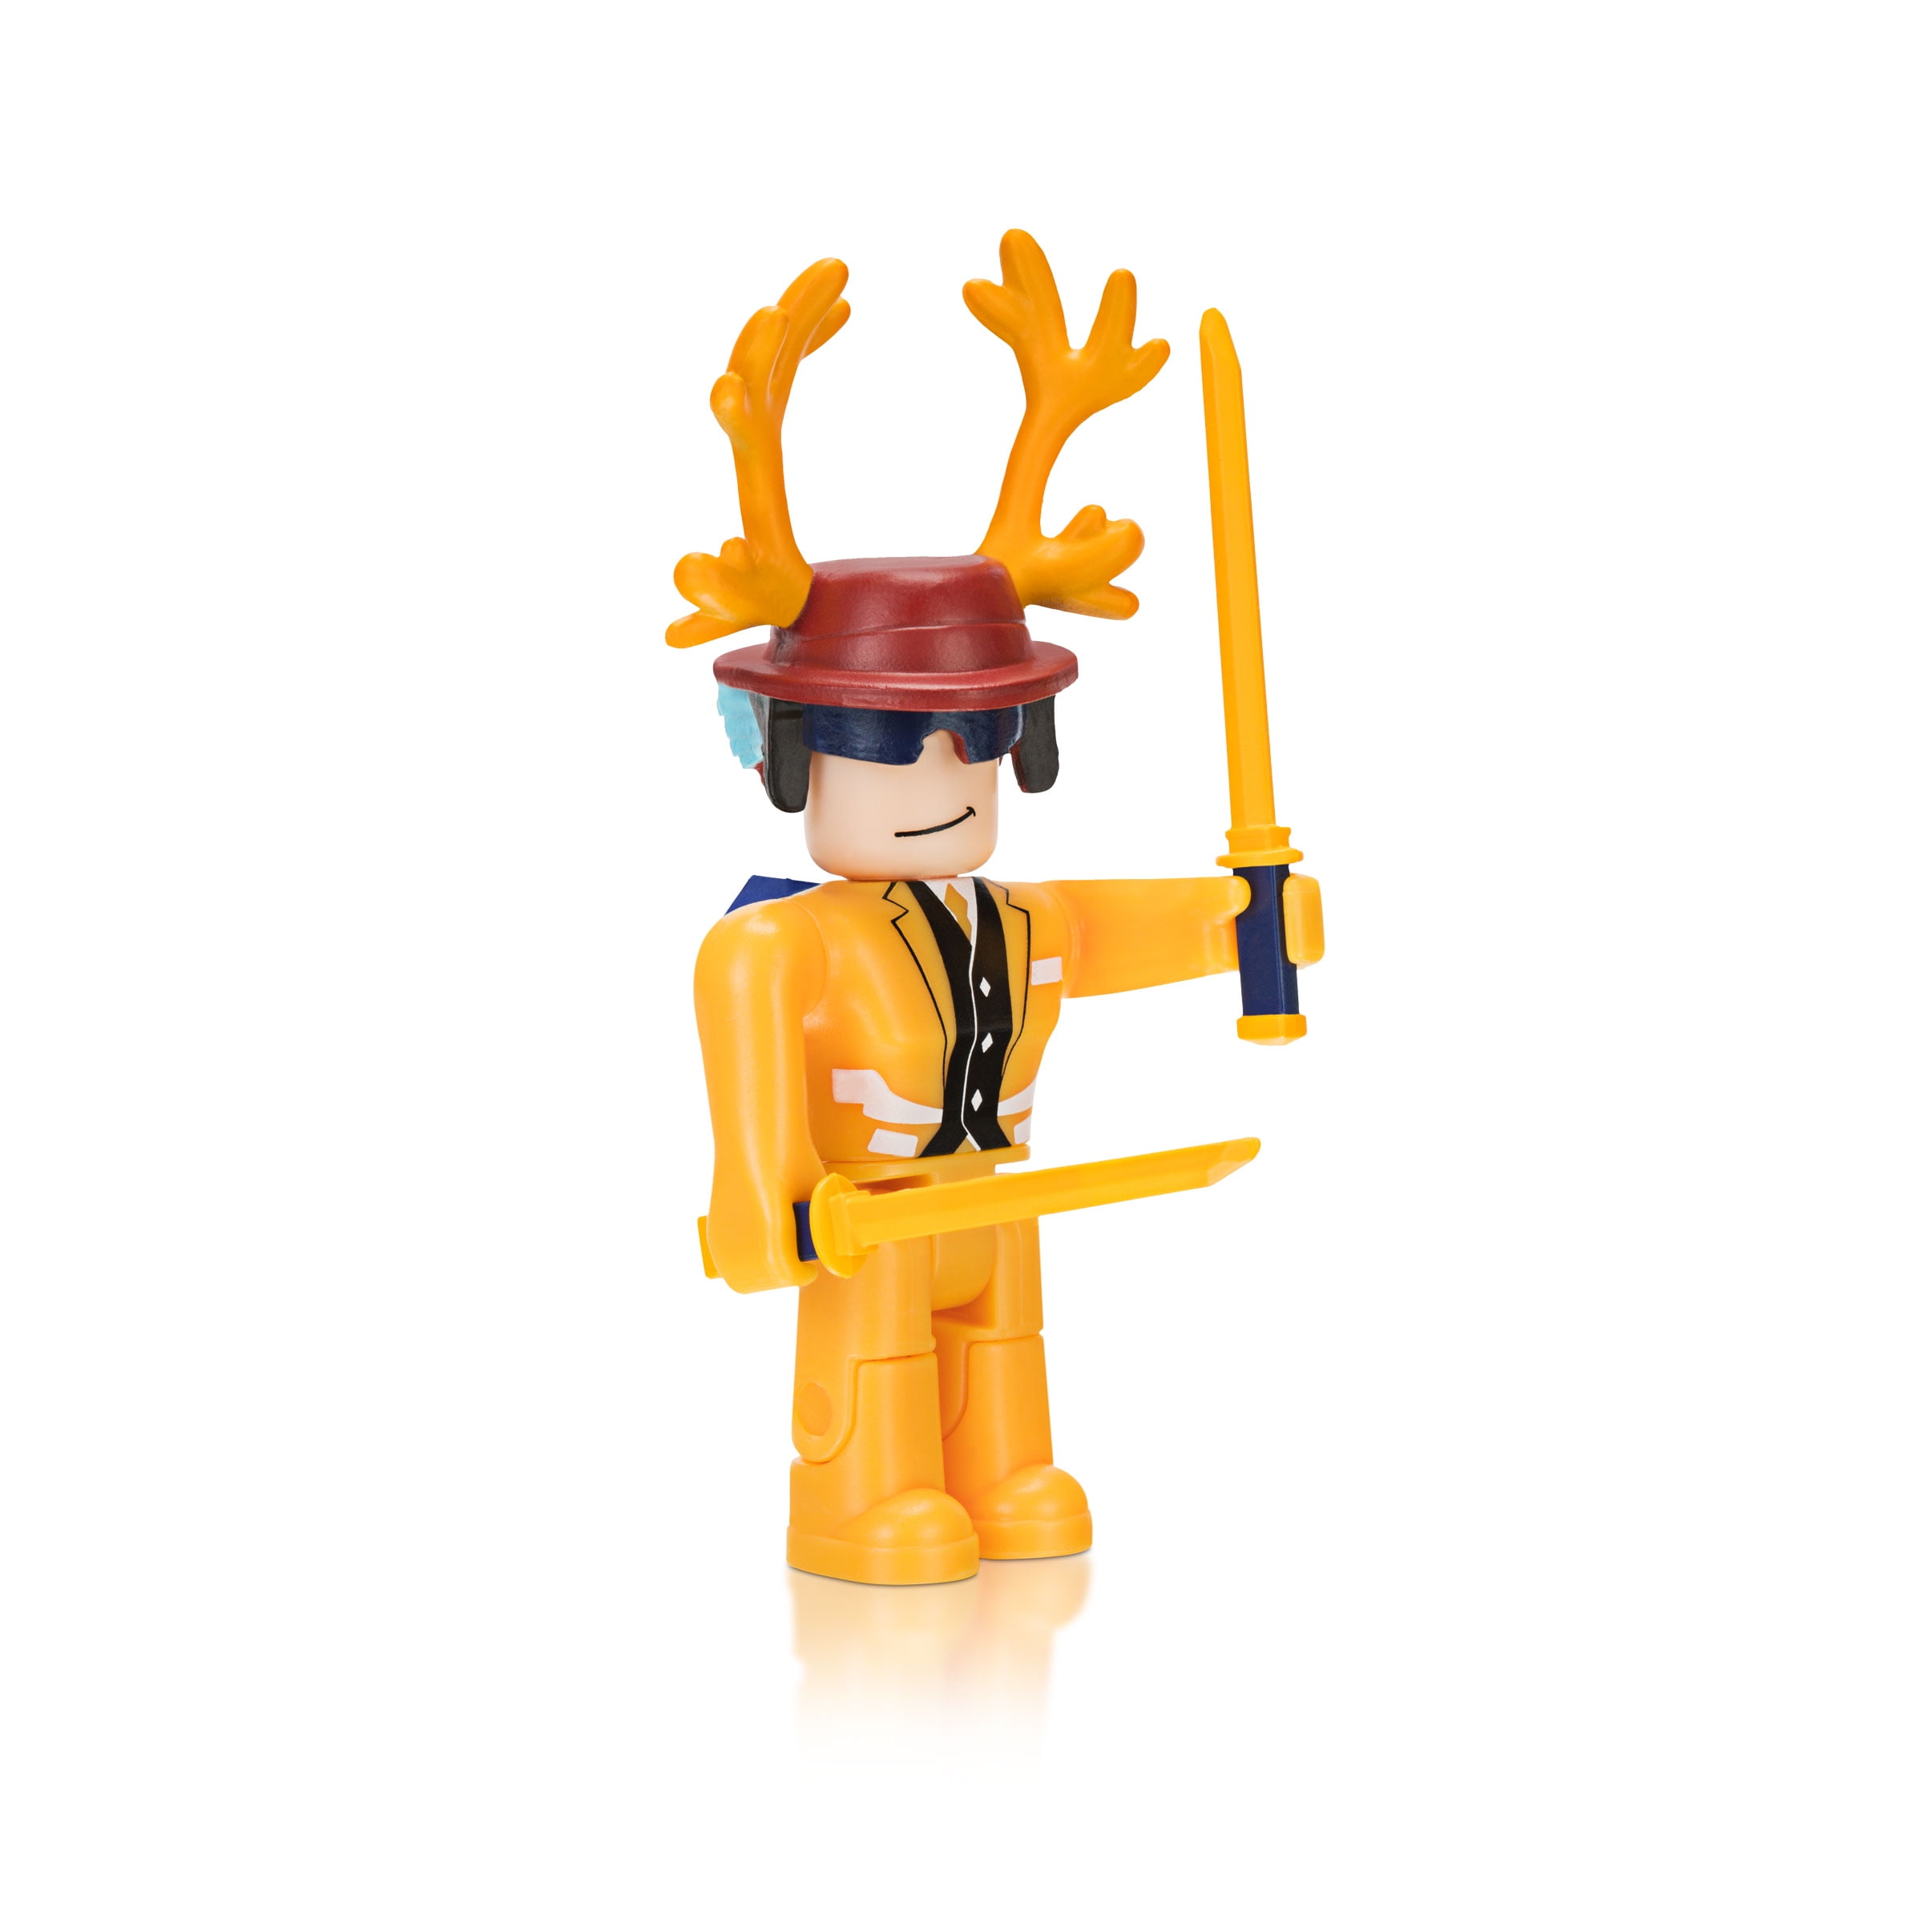 Roblox Action Collection Series 6 Mystery Figure Includes 1 Figure Exclusive Virtual Item Walmart Com Walmart Com - roblox mystery figure series 3 polybag of 6 action figures walmart com walmart com